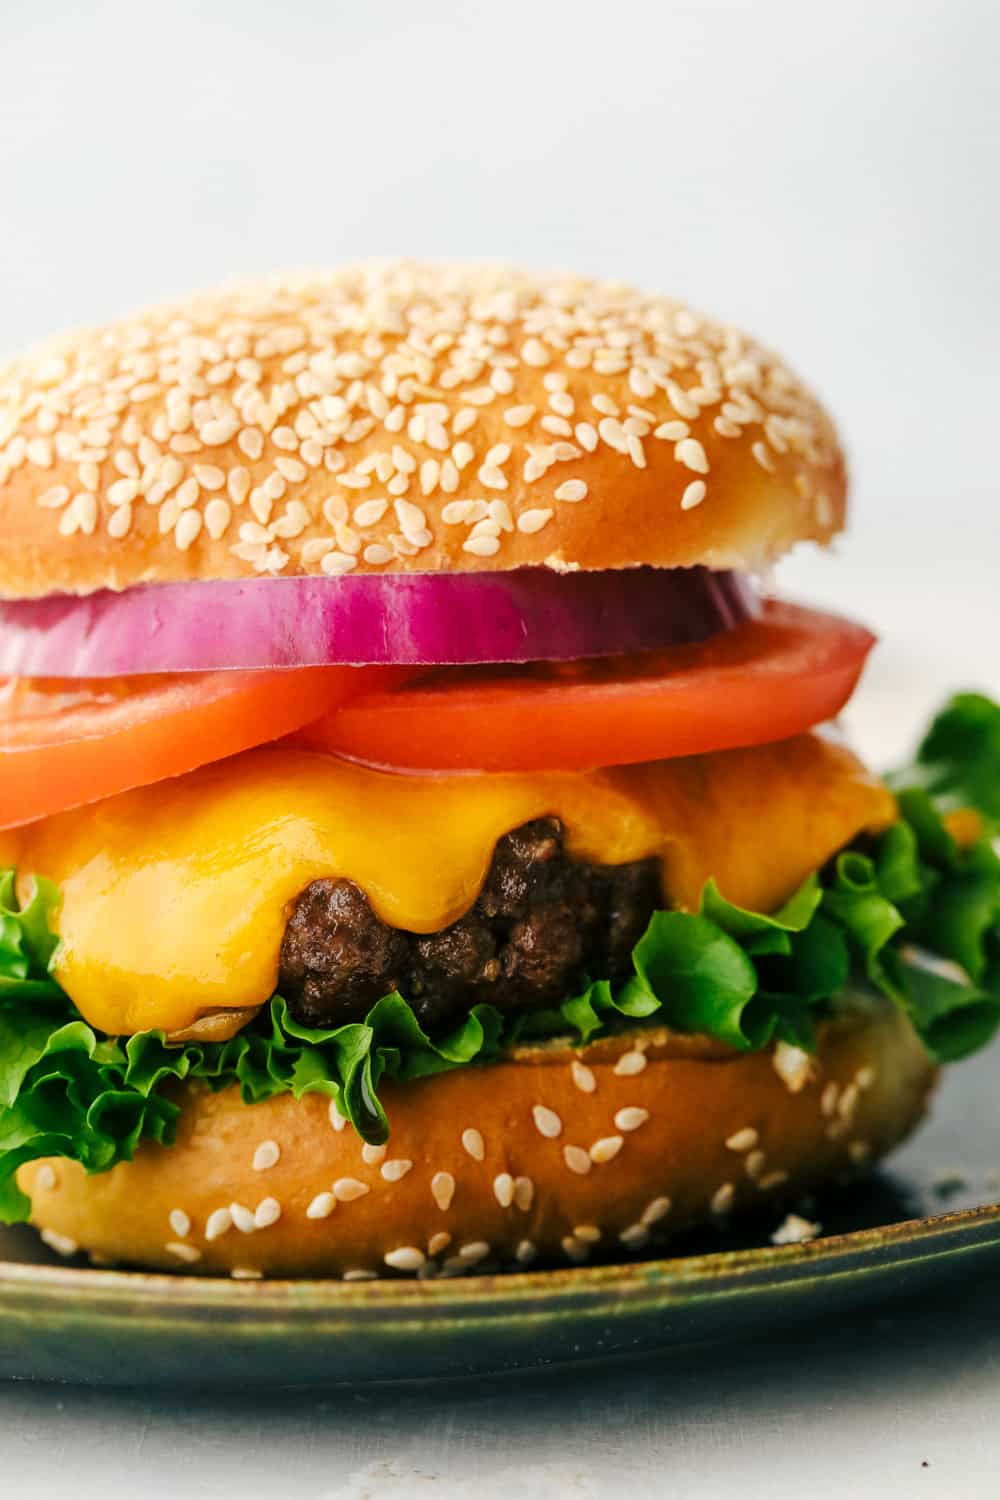 Perfect juicy air fryer hamburger on a bun with cheese, tomato, lettuce and onion. 